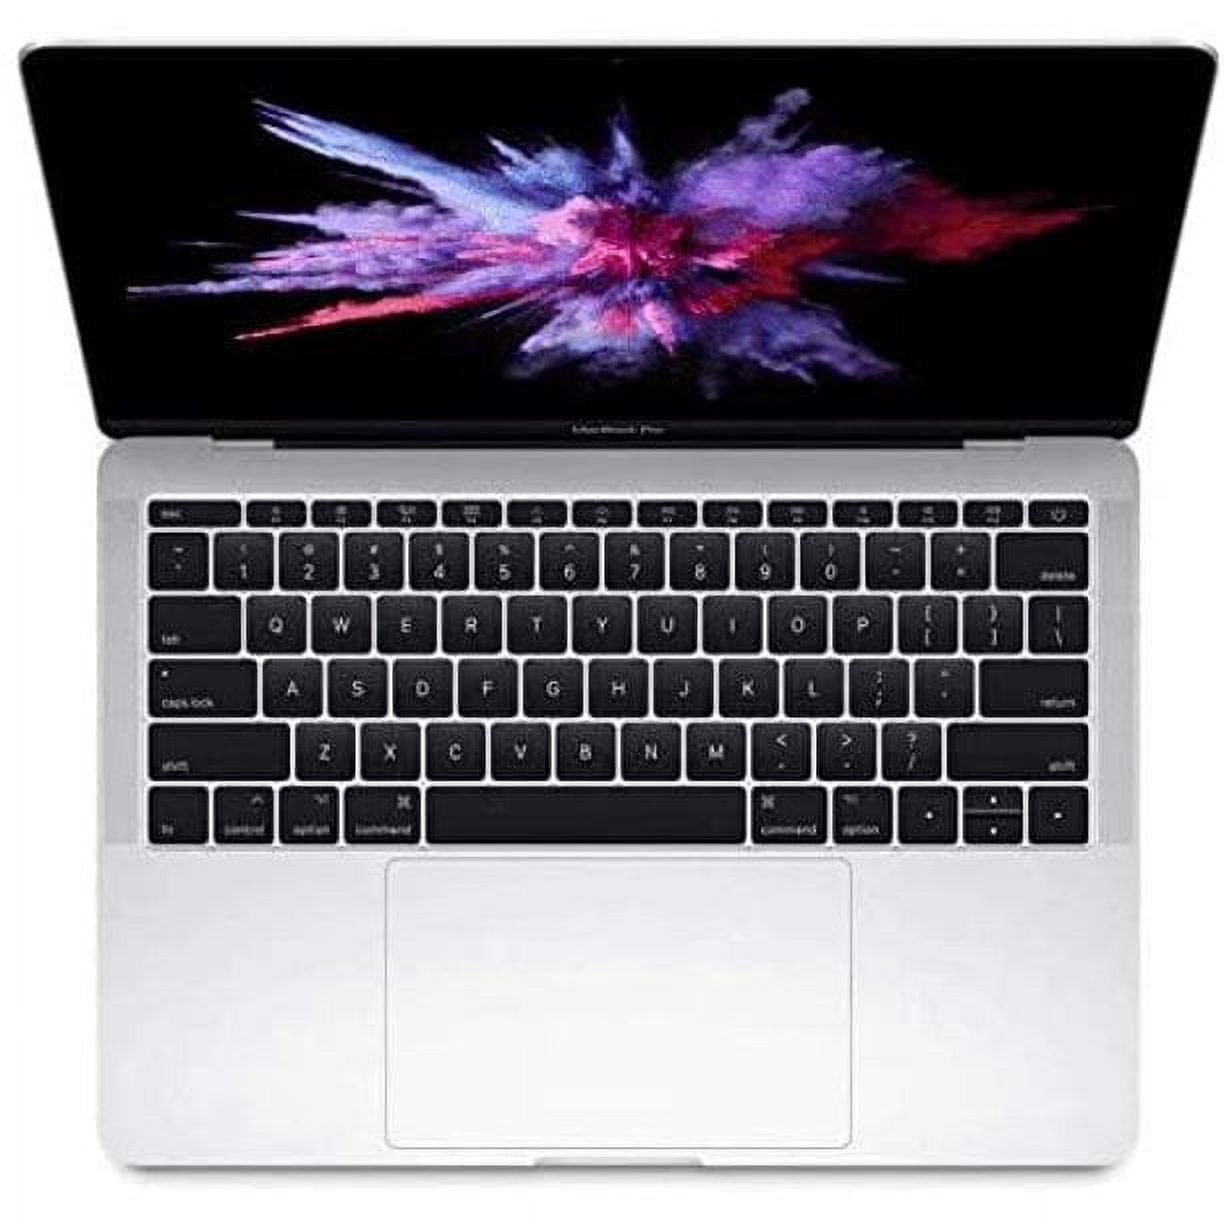 Apple MacBook Pro MPXV2LL/A With Touch Bar Mid-2017 13.3inch Silver  I5-7267U 3.1GHz 8GB 256GB SSD (Scratch and Dent)